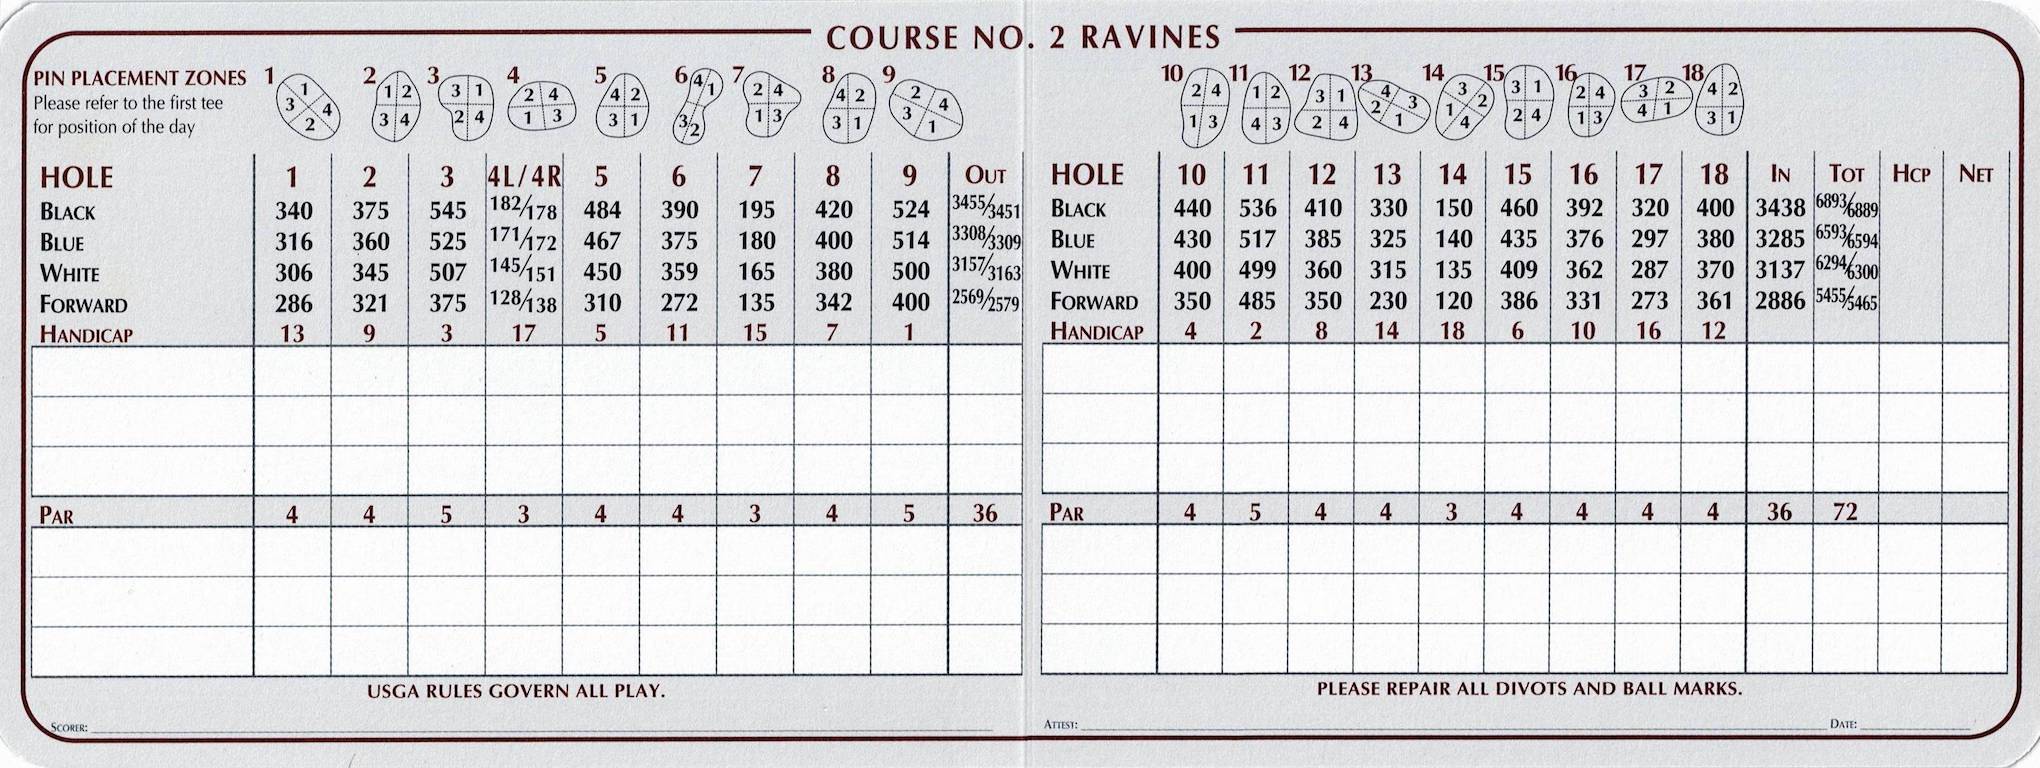 Scan of the scorecard from Cog Hill Course #2 - Ravines in Lemont, Illinois. Note that hole 4 has two completely separate tee boxes and greens, called 4L and 4R, which add variety to the course depending on when you play it.